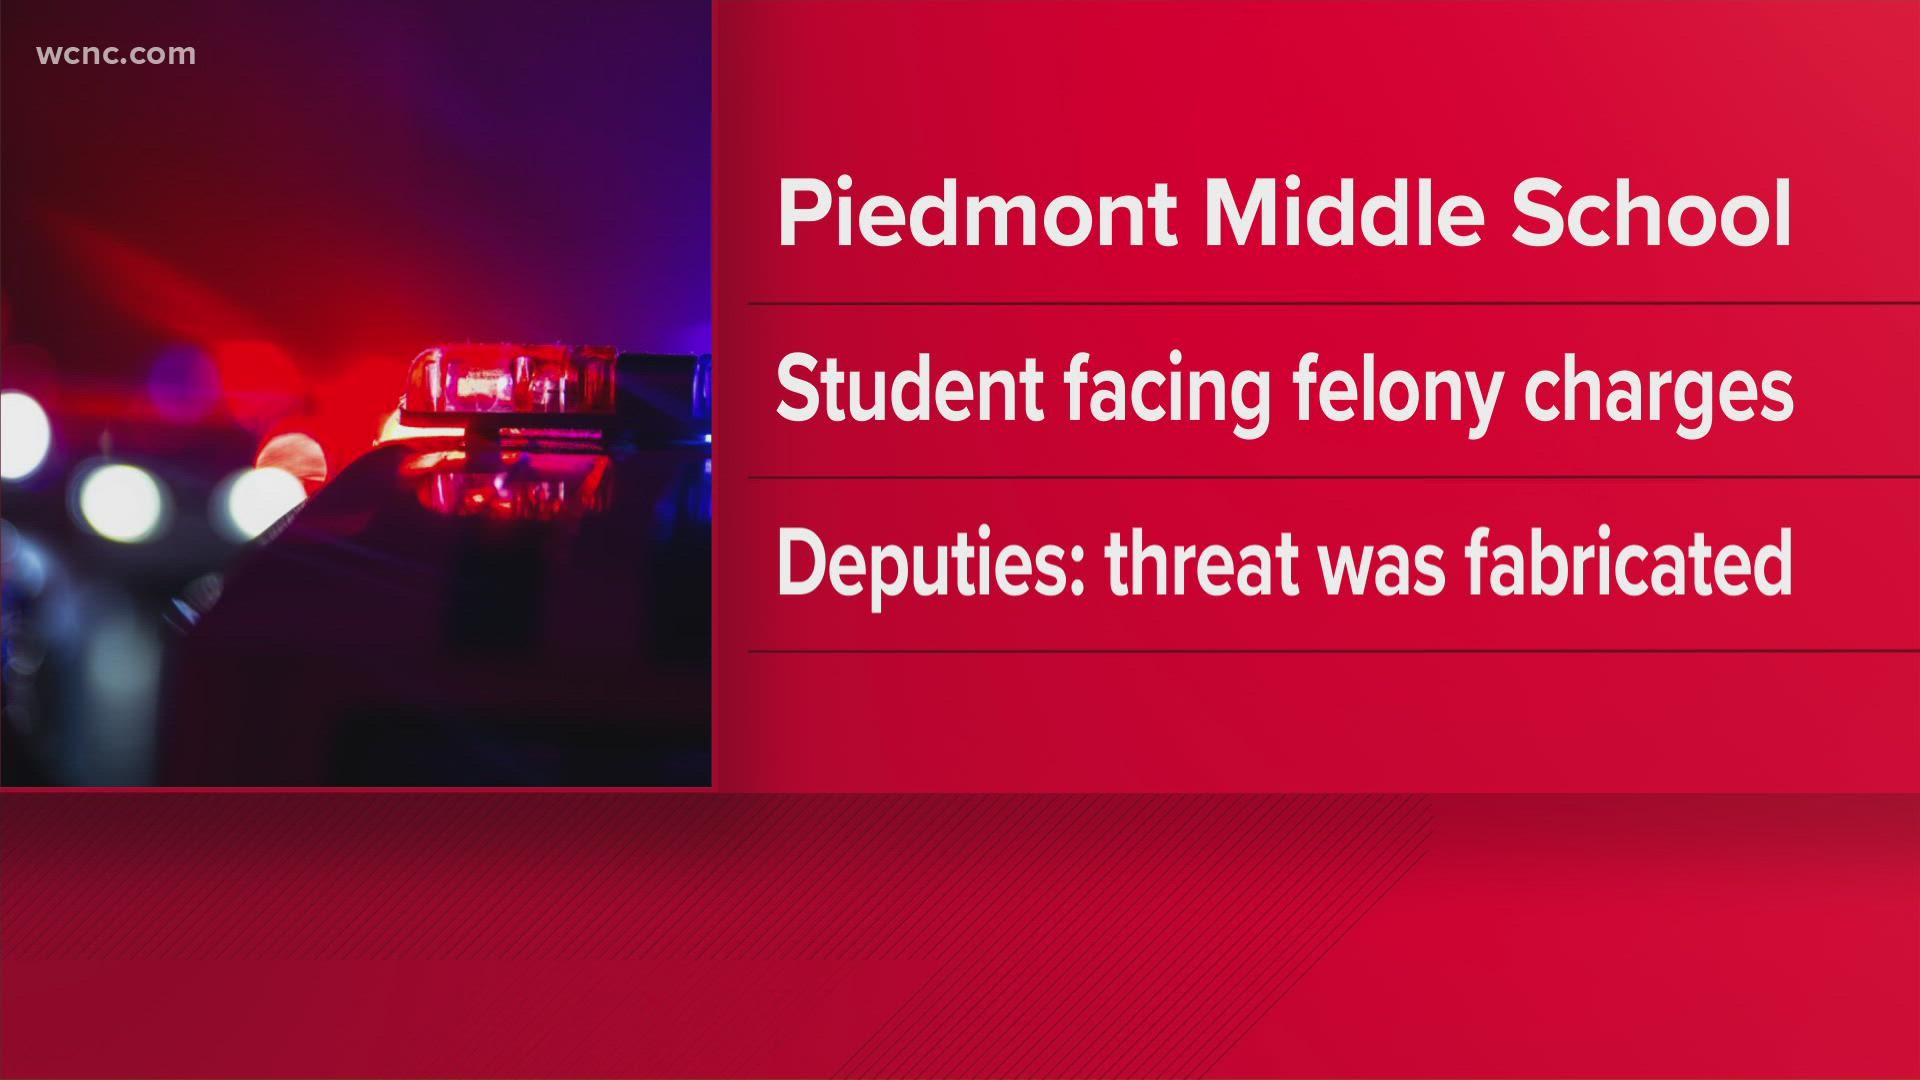 The student confessed to faking the threats.